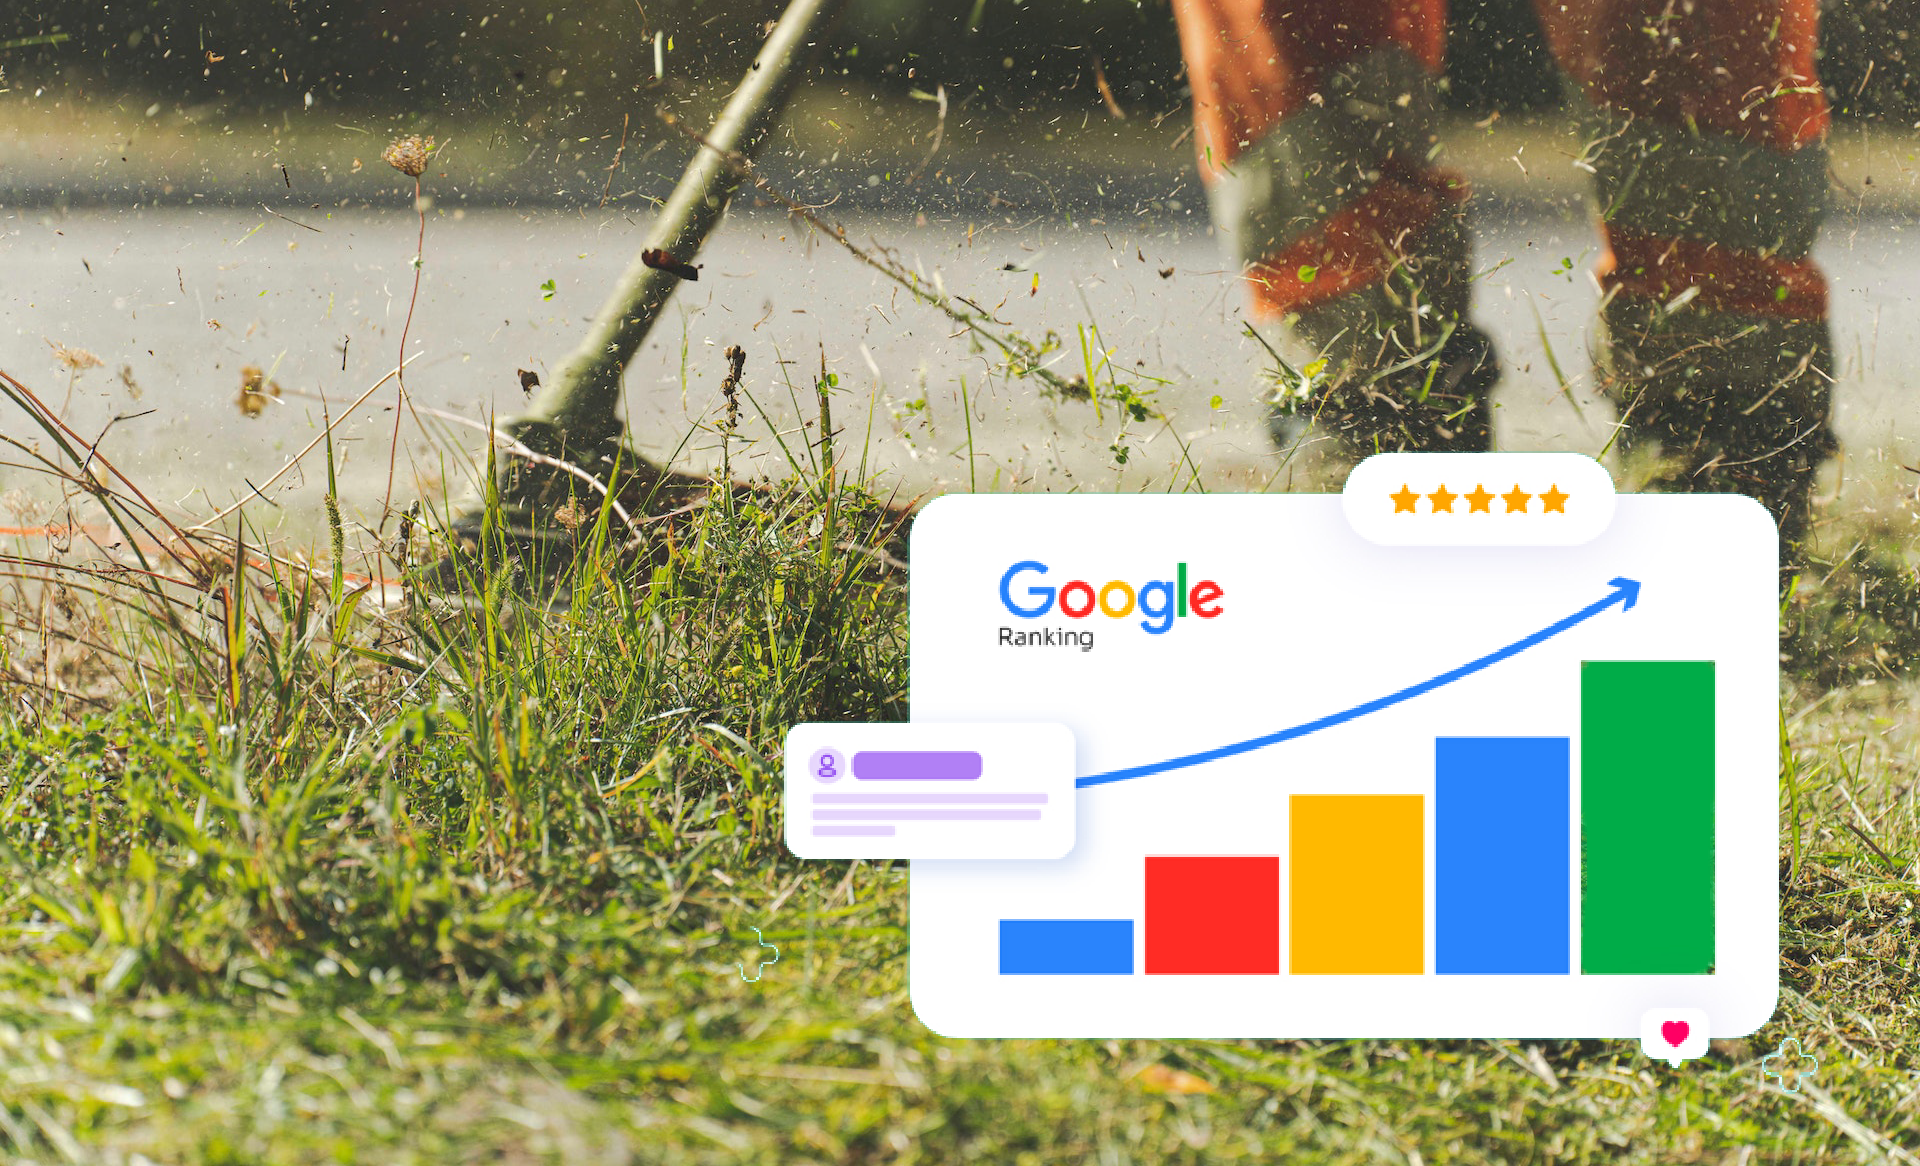 SEO for Landscapers: How to Get Landscaping and Lawn Care Leads on Google